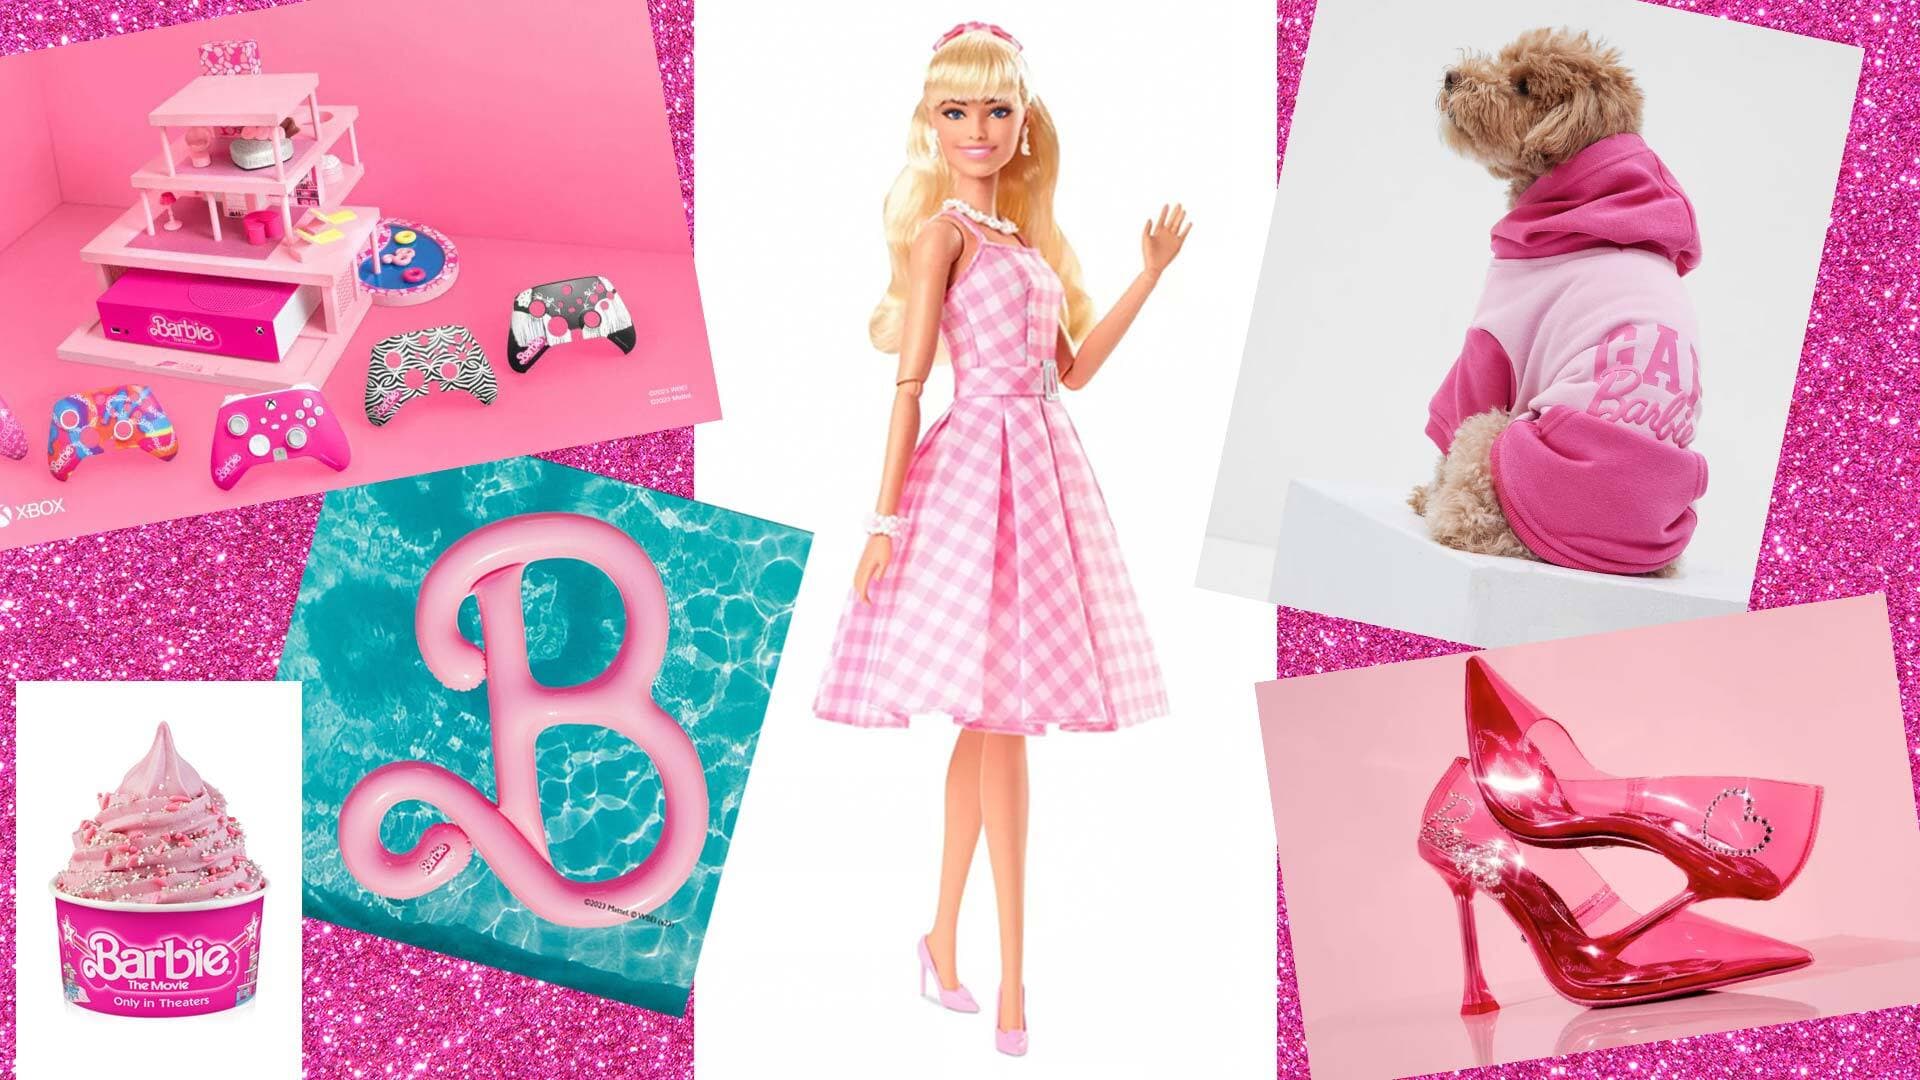 Barbie-themed merchandise, including frozen yogurt, a pool float, an Xbox, a doll, pink high heels, and a dog hoodie